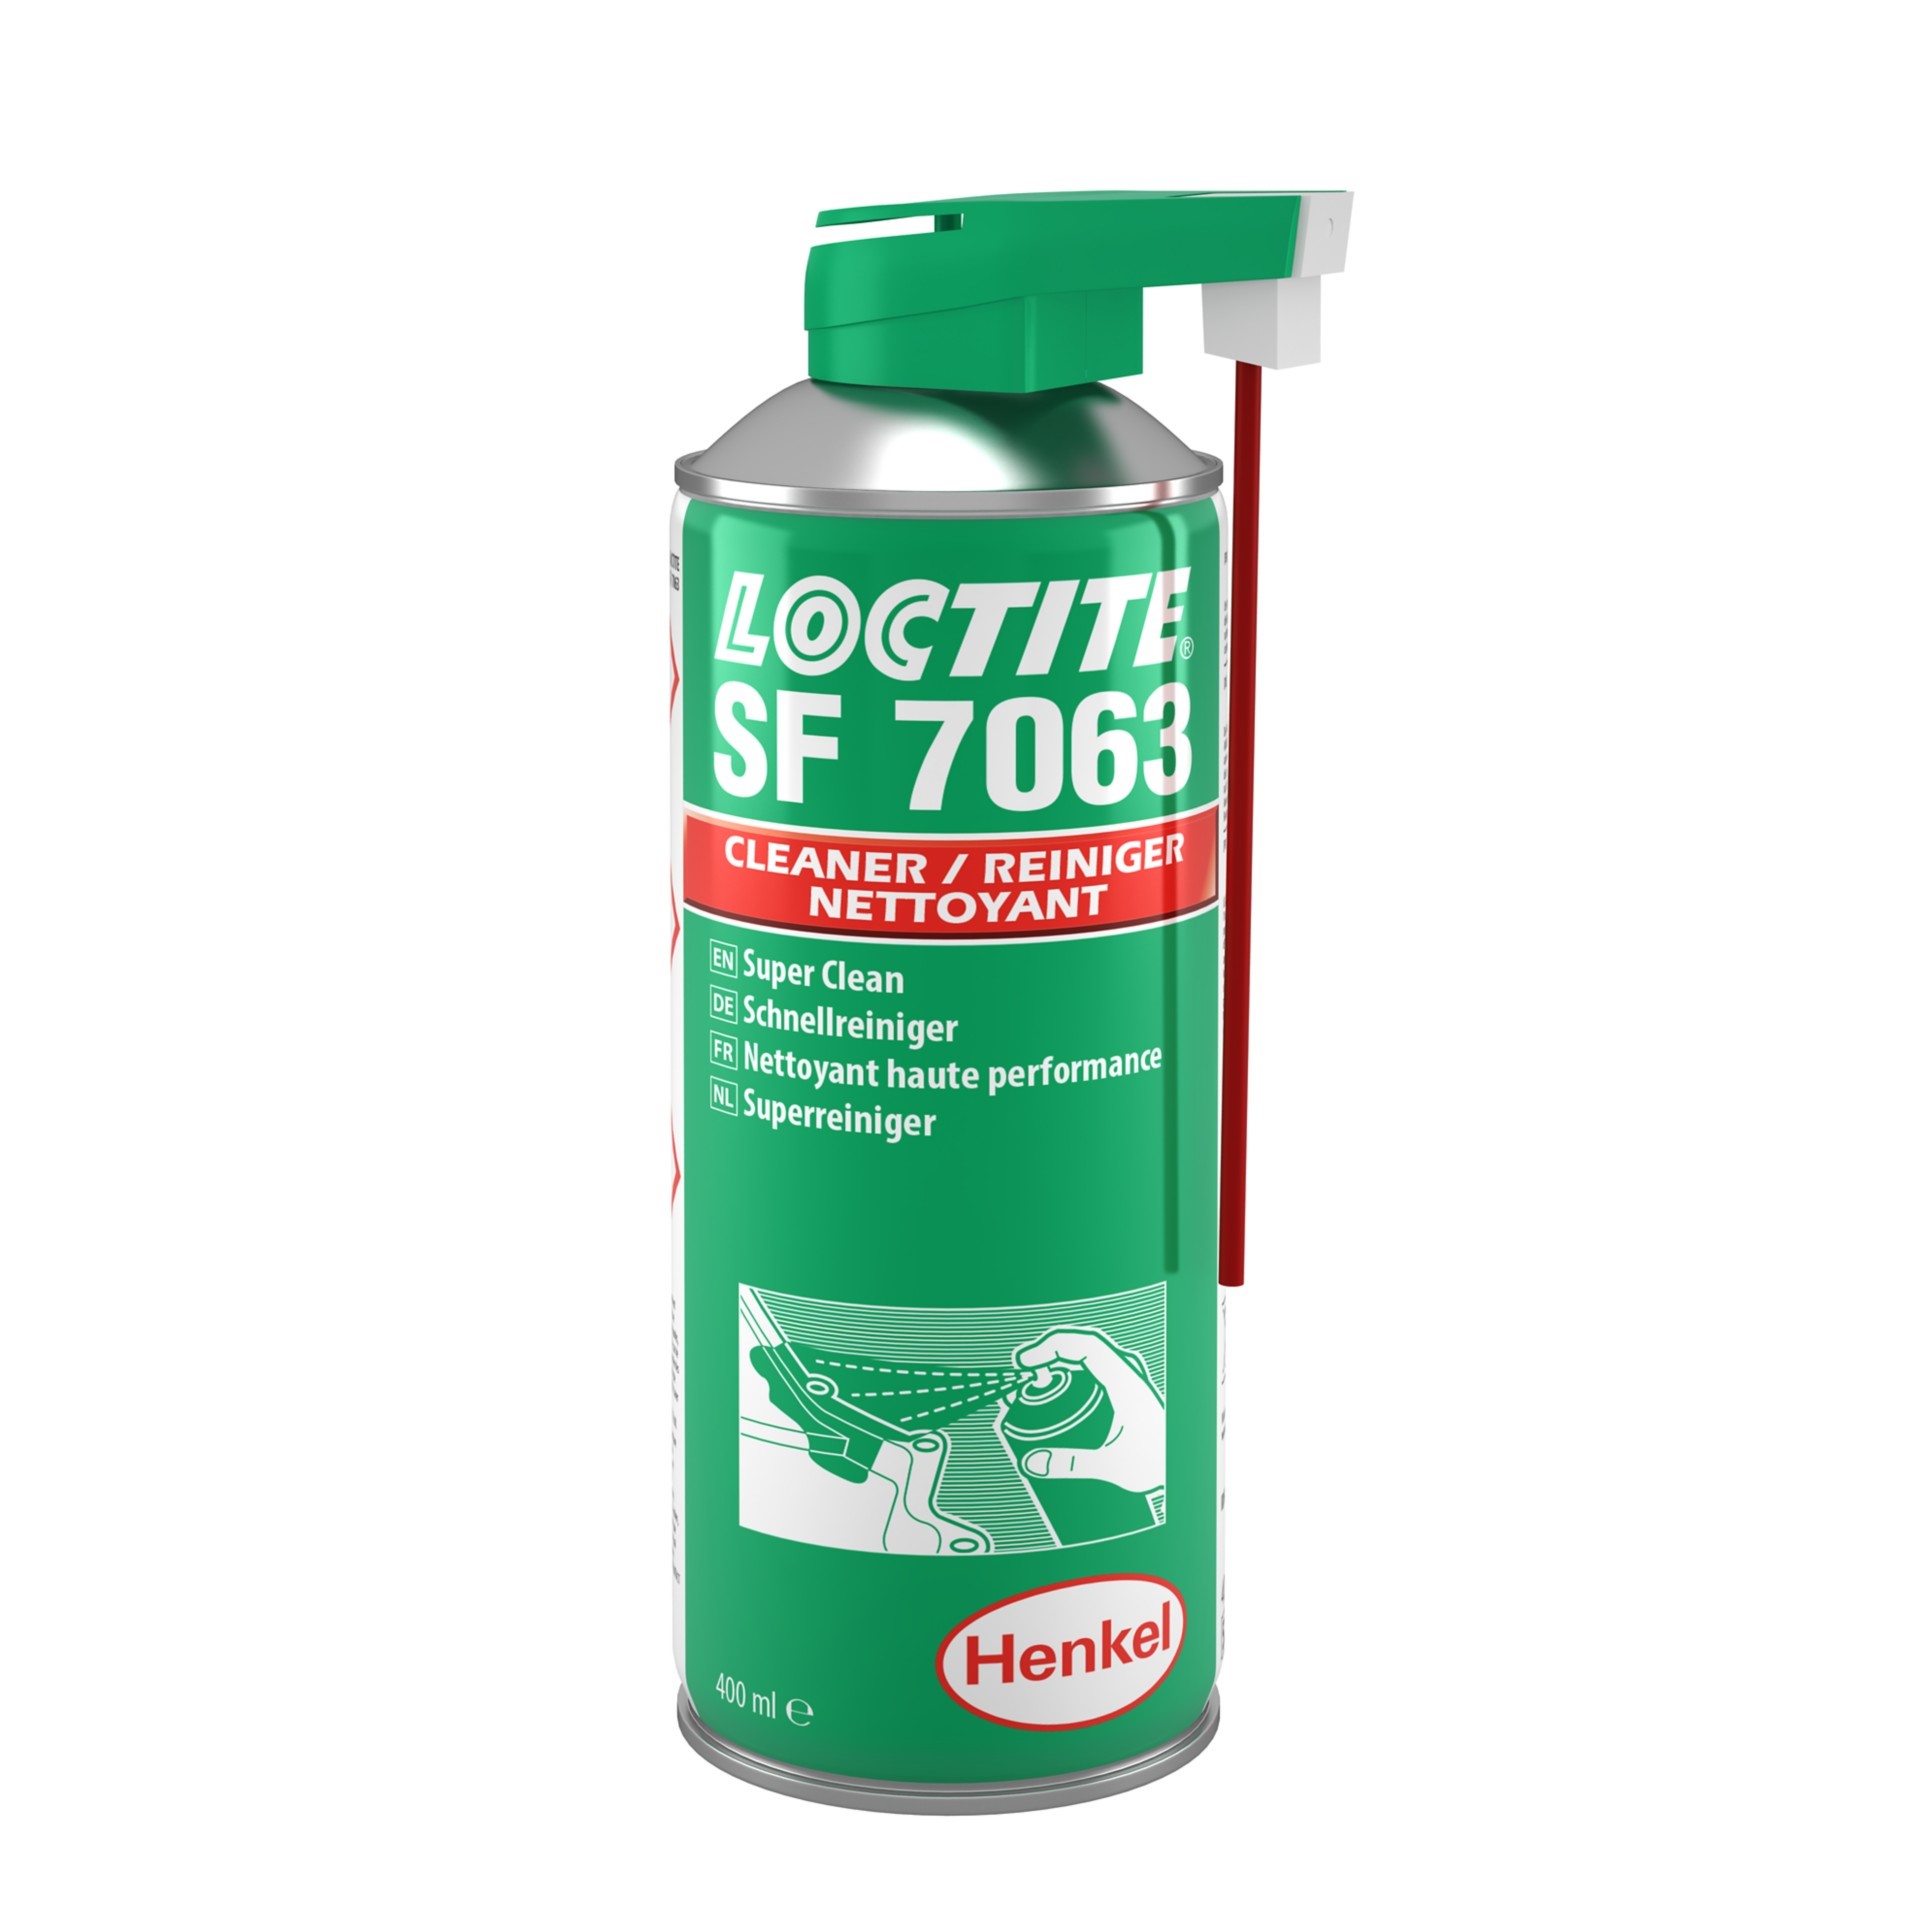 LOCTITE Super-Clean in a canister